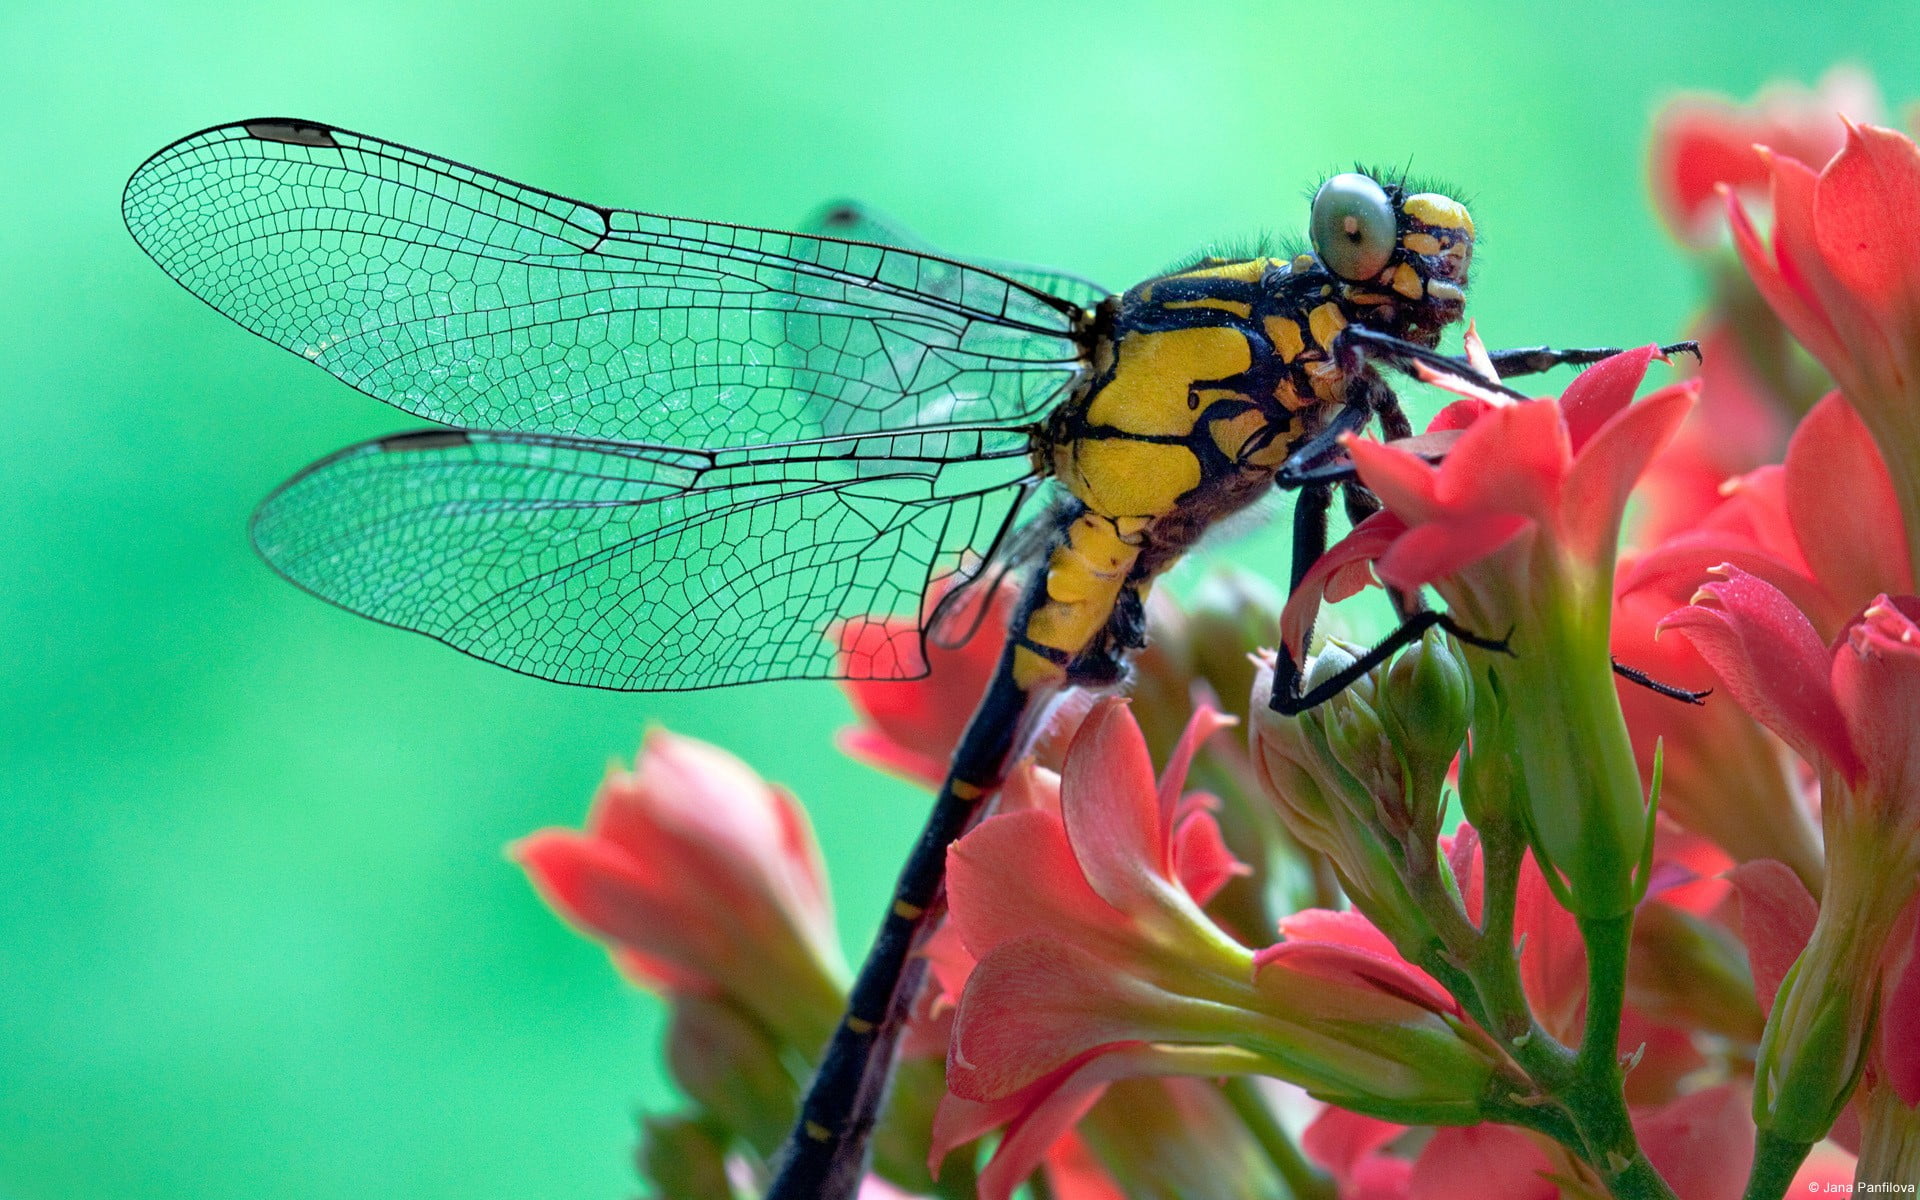 yellow and black dragonfly perched on red flower selective focus photography, nature, animals, dragonflies, insect